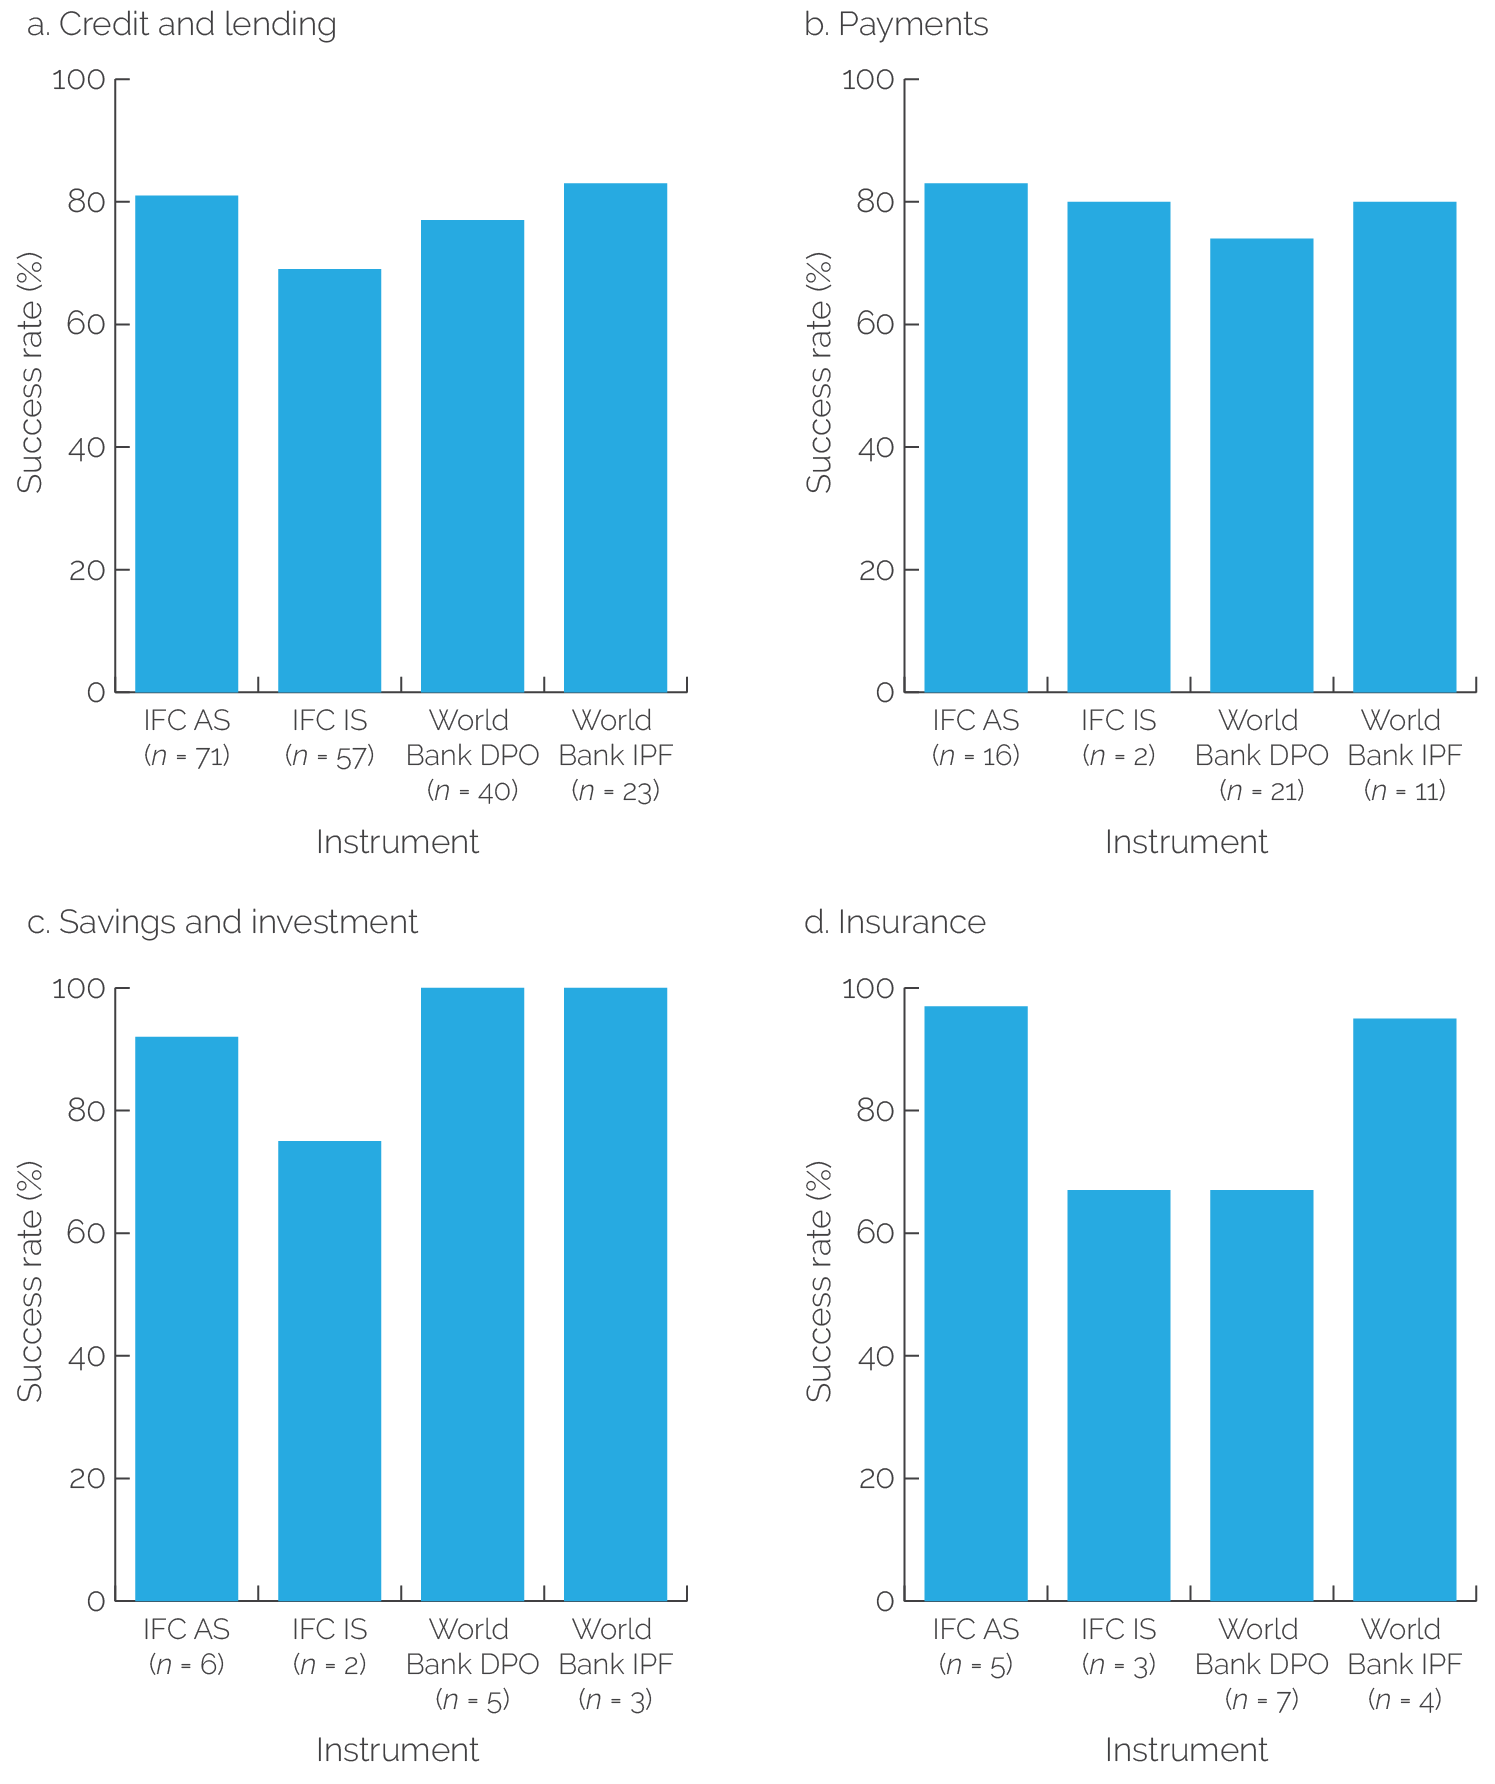 Column charts in four panels show, by instrument (I F C A S, I F C I S, World Bank D P O, and World Bank I P F), mixed results for the success of support for credit and lending (panel A), payments (panel B), savings and investment (panel c), and insurance (panel D).